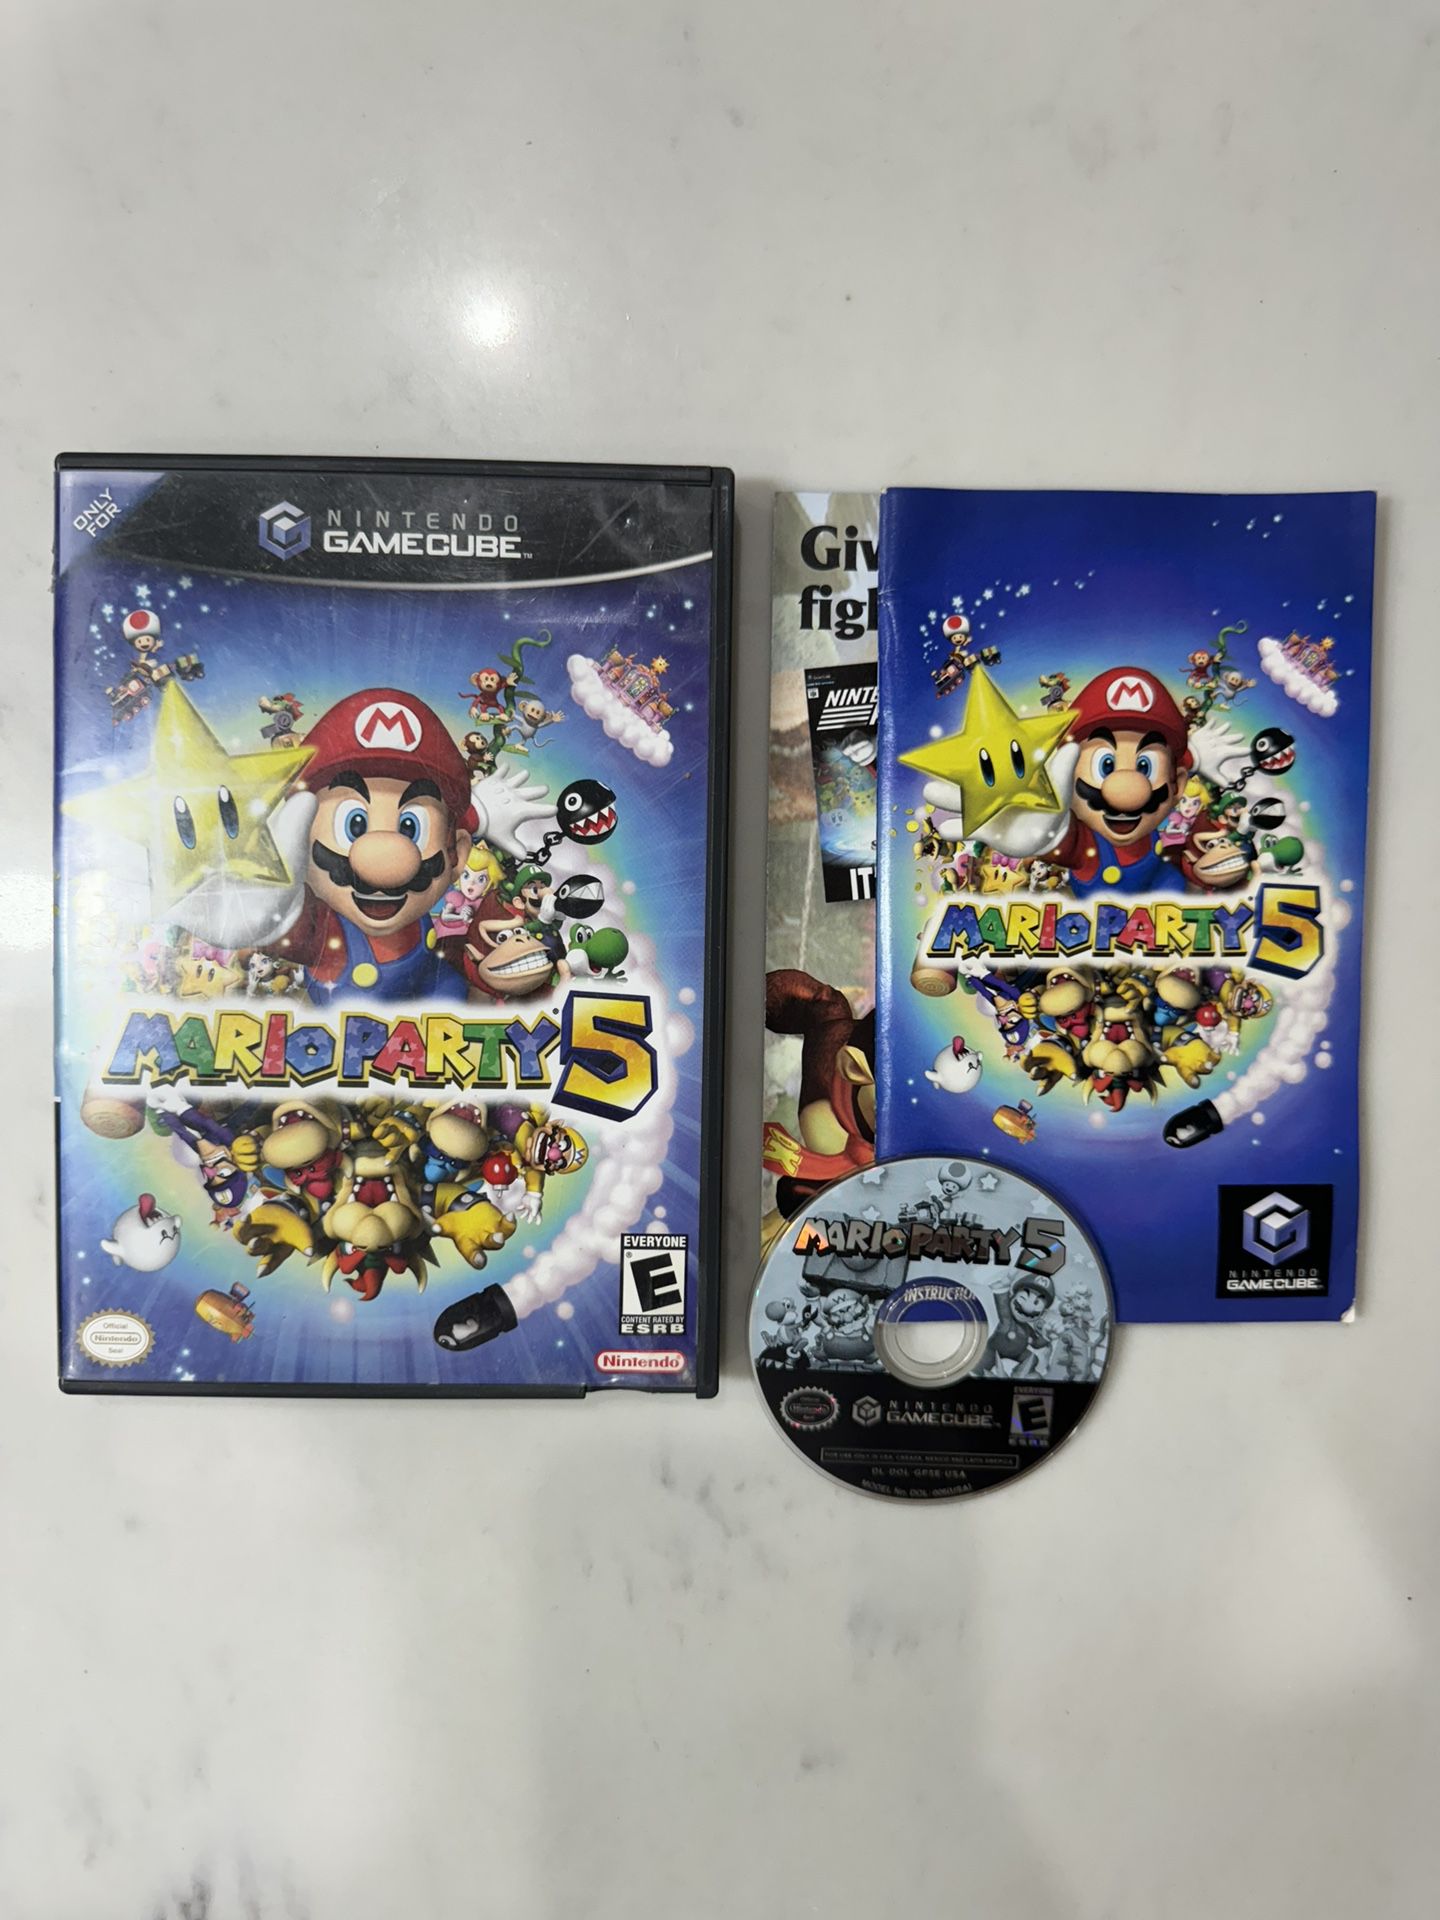 Mario Party 5 Scratch-Less for Nintendo GameCube